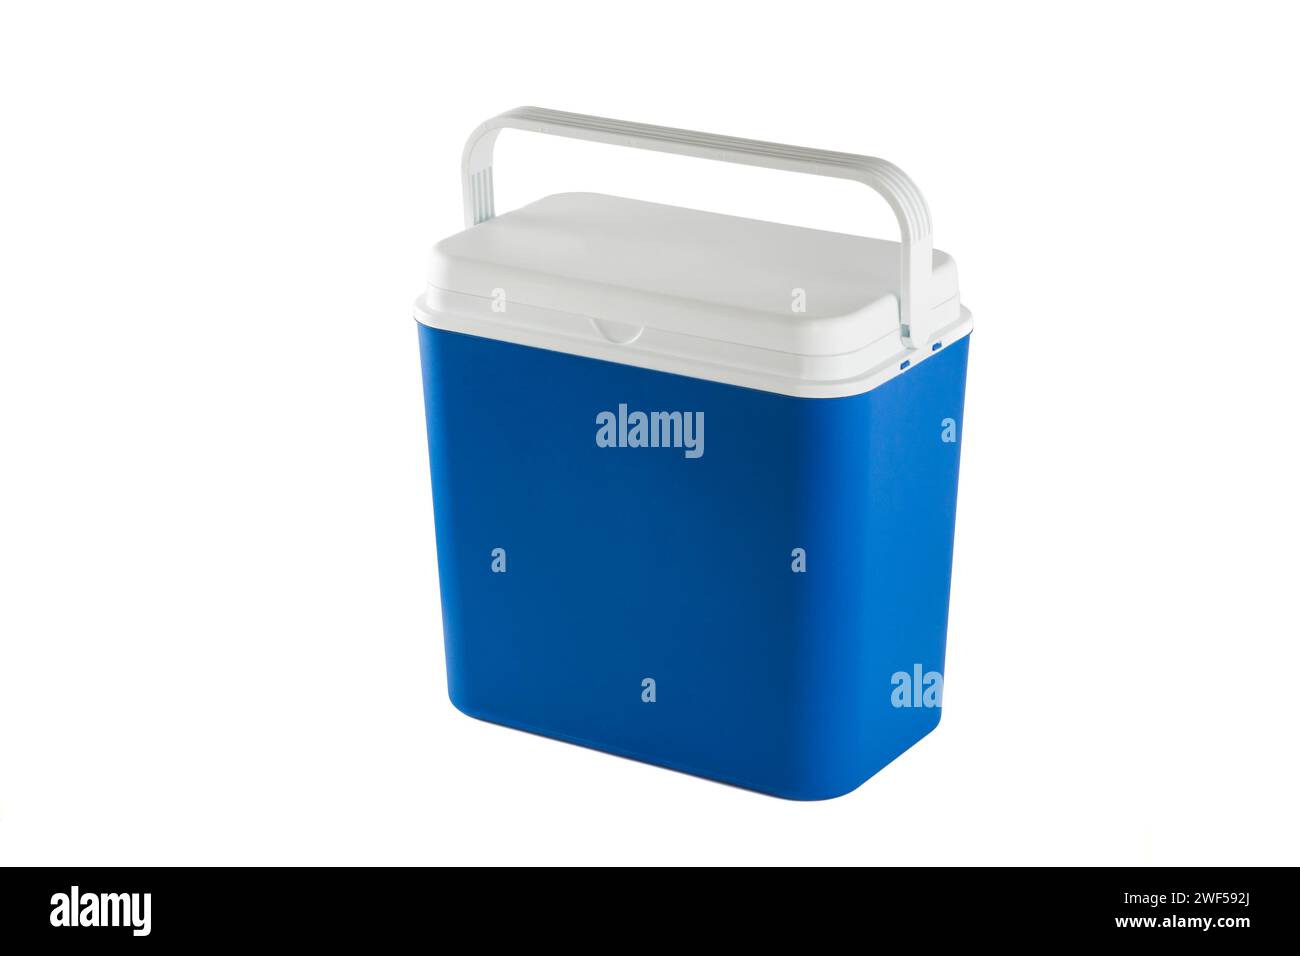 Closed blue plastic cooler isolated on white background Stock Photo